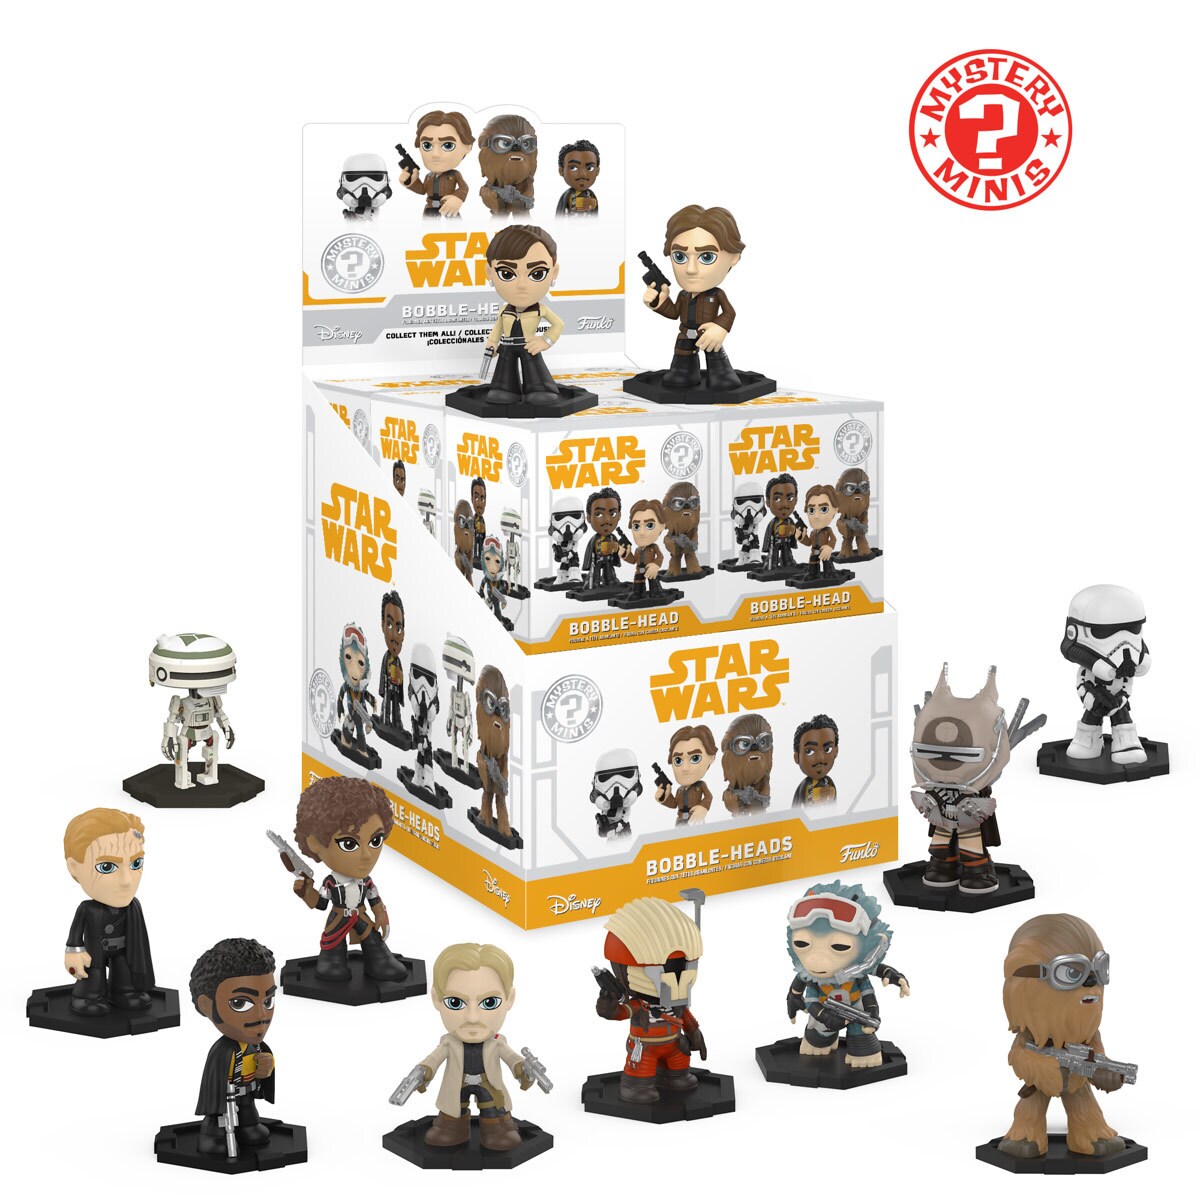 Solo: A Star Wars Story toys with large heads.